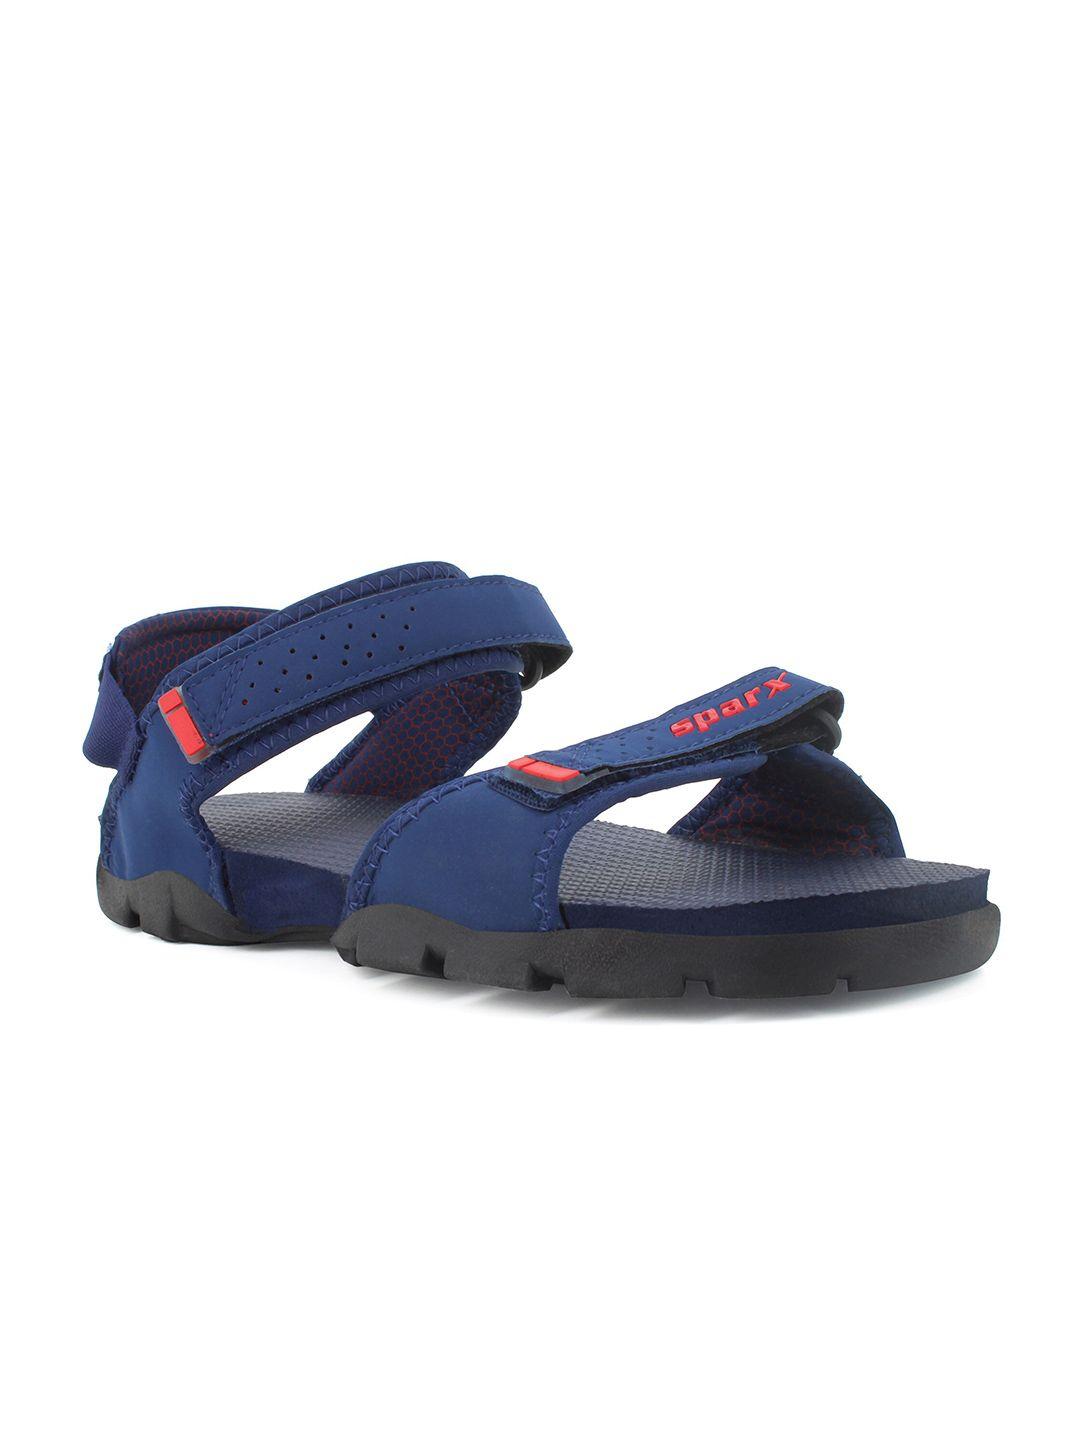 sparx kids textured sports sandals with velcro closure